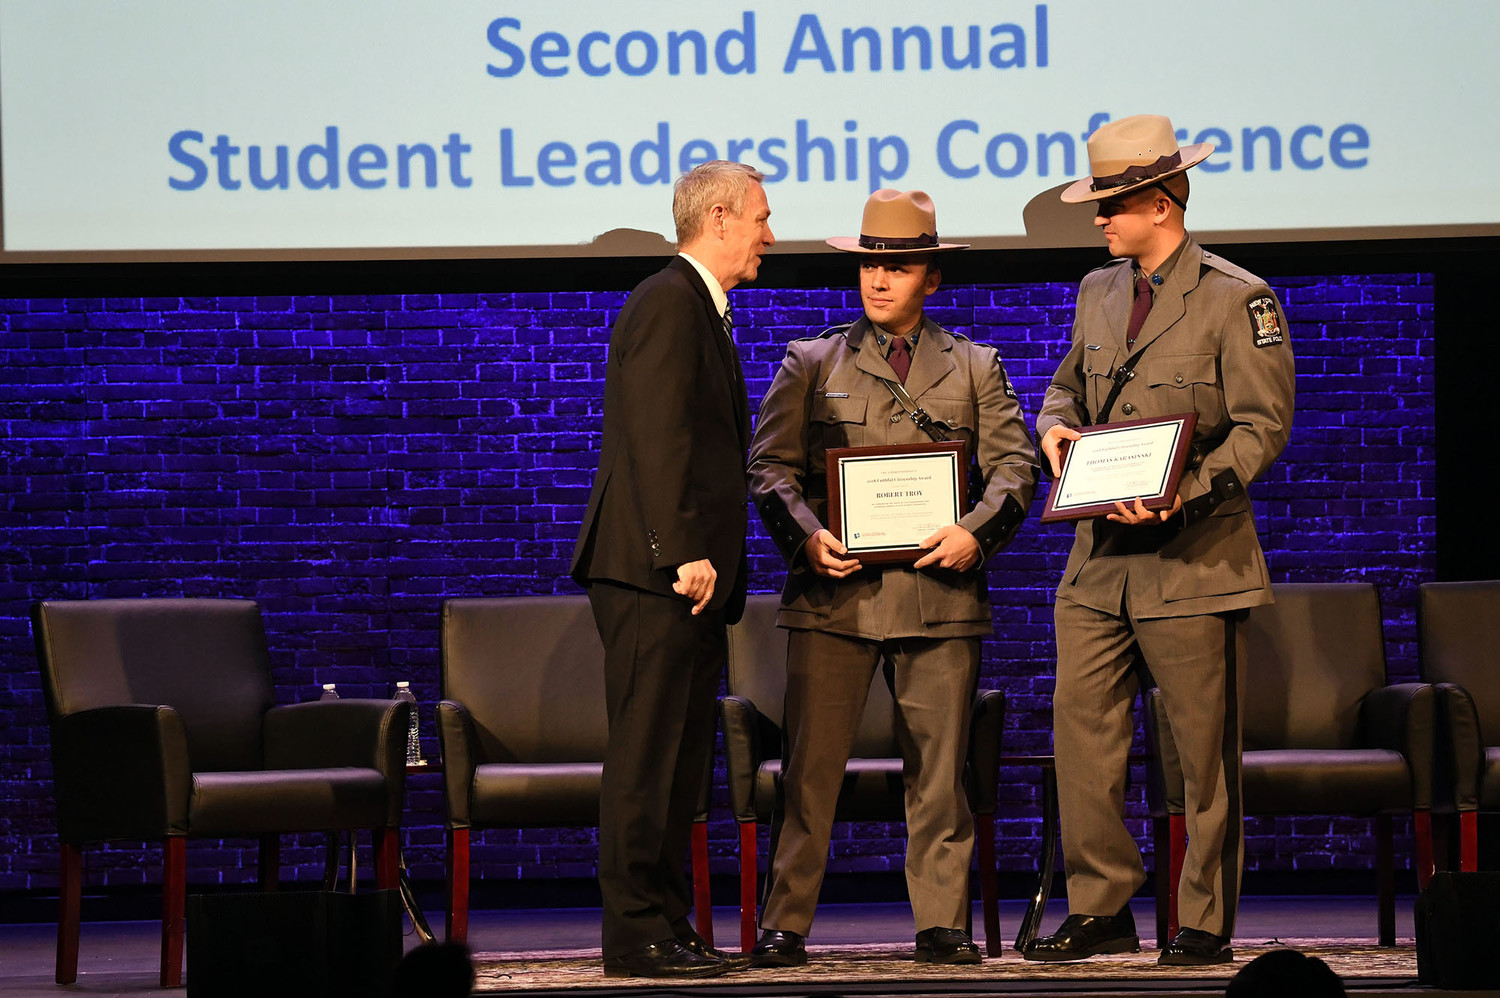 New York state troopers Robert Troy and Thomas Karasinski receive the 2018 Faithful Citizenship Award from Dr. Timothy J. McNiff, superintendent of schools in the archdiocese, during the second annual Student Leadership Conference at the Sheen Center for Thought & Culture in Manhattan March 5.